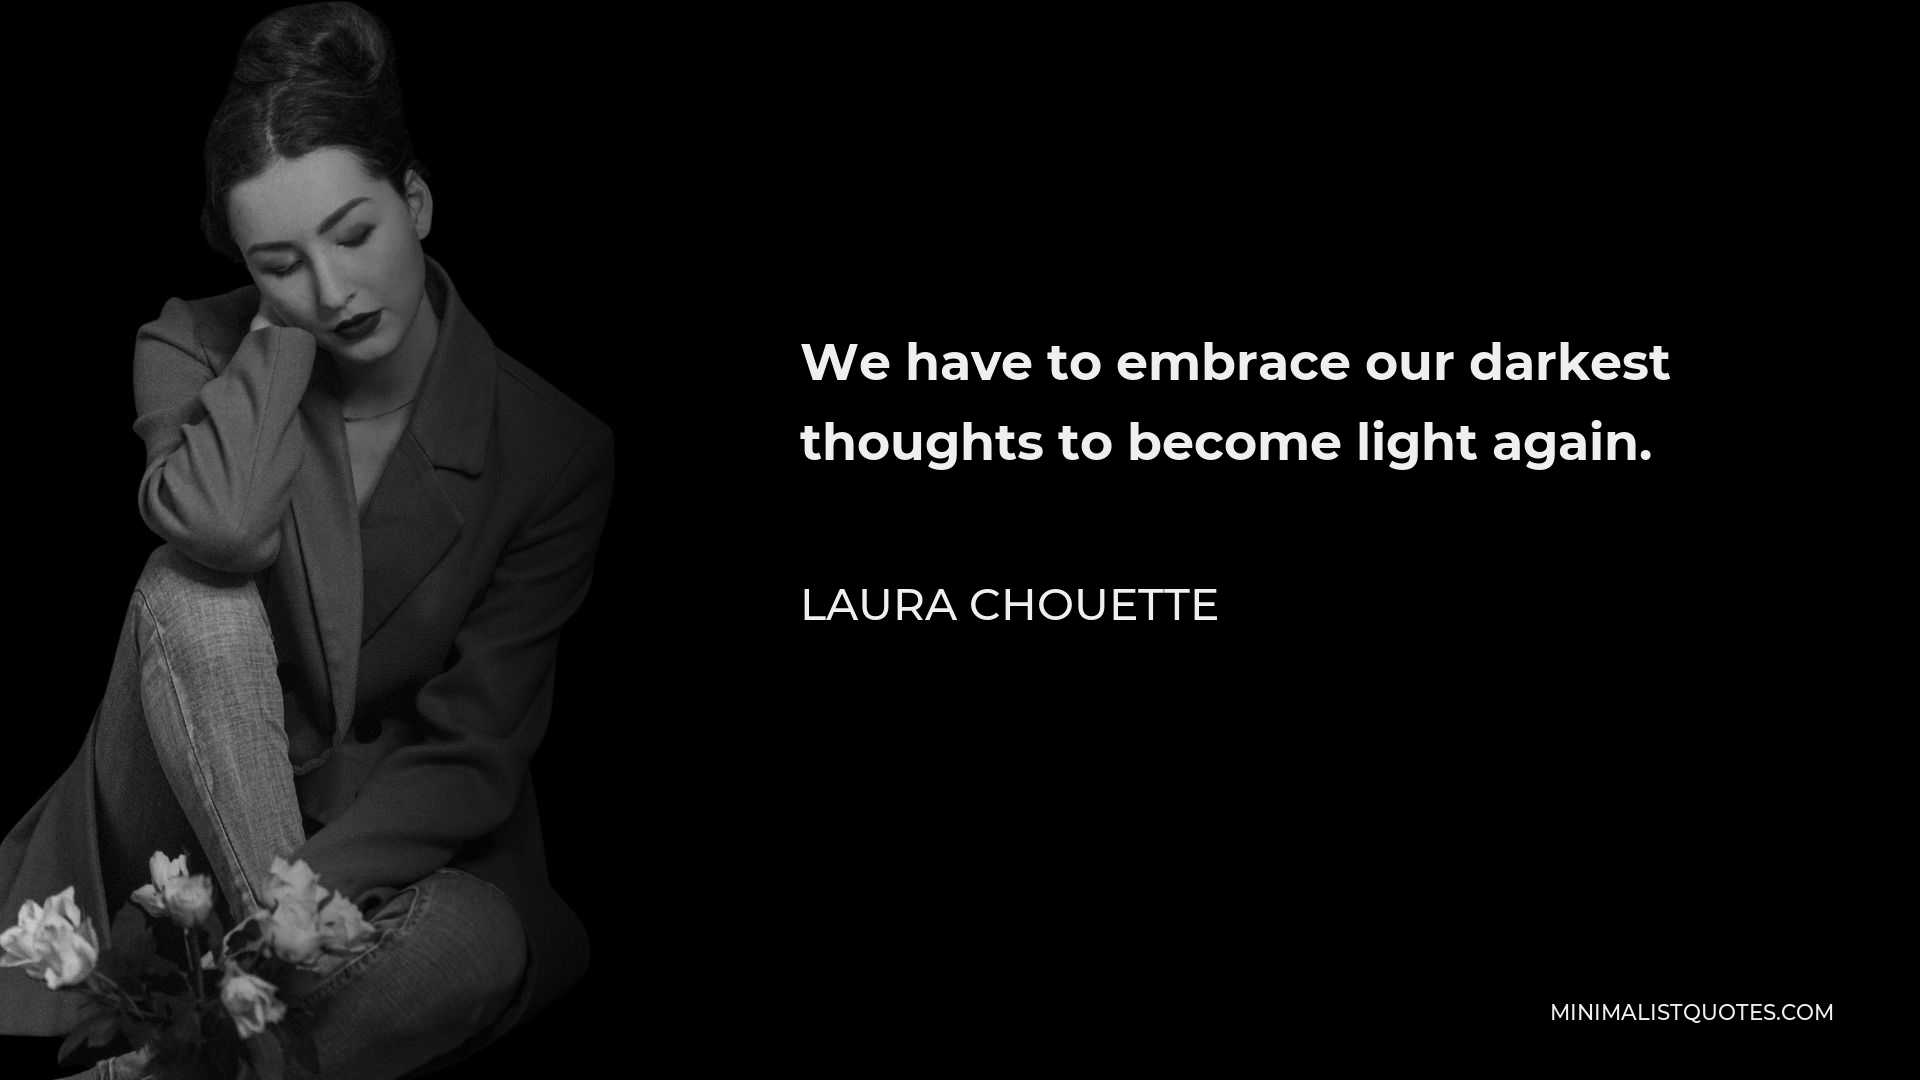 Laura Chouette Quote - We have to embrace our darkest thoughts to become light again.